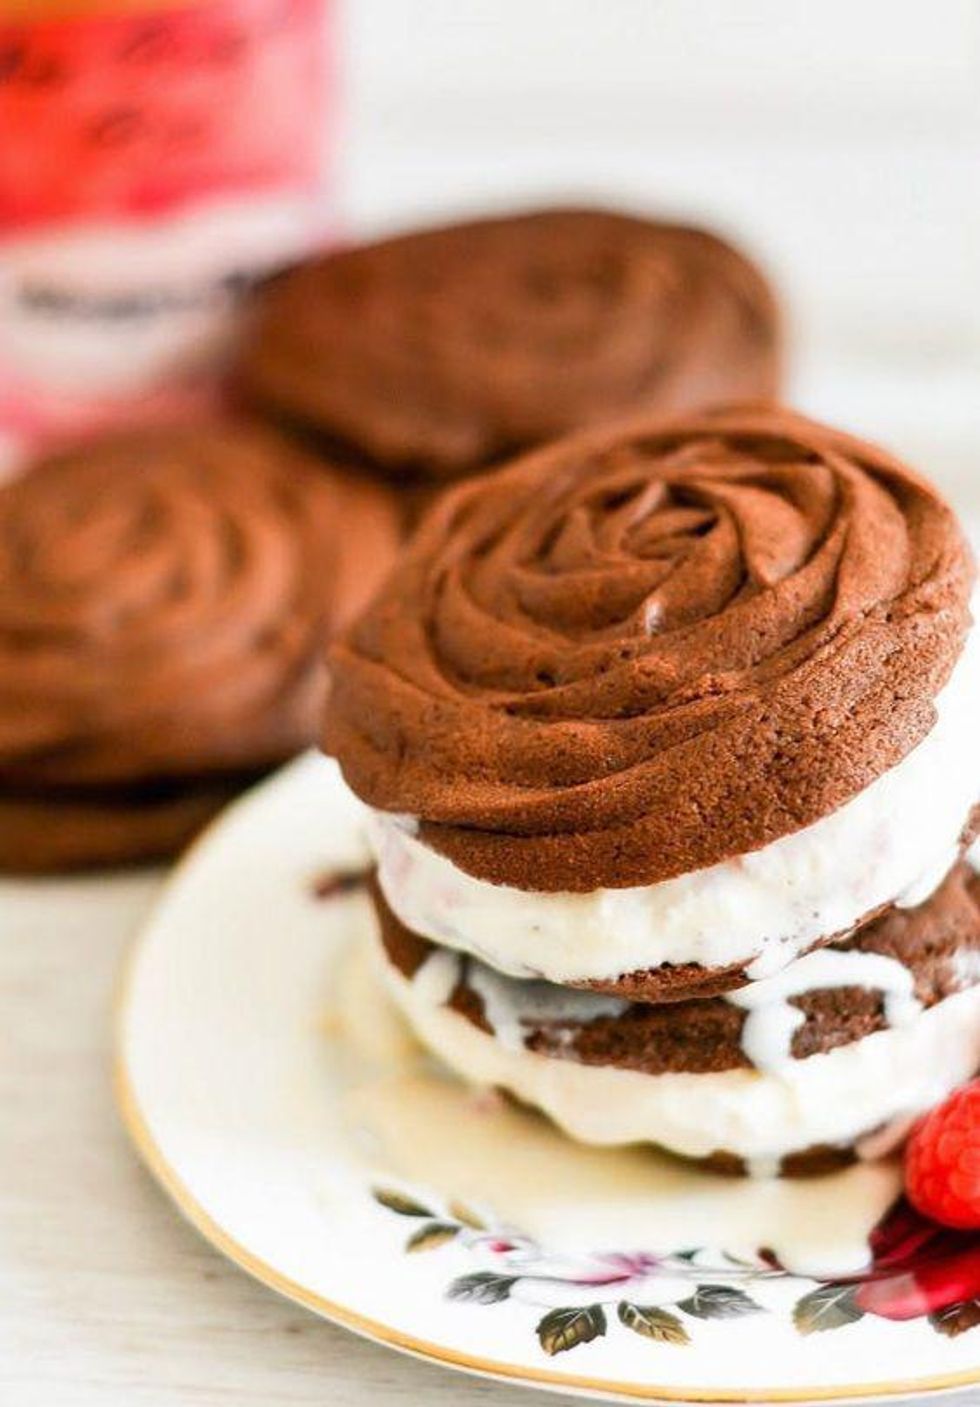 17 Unique Ice Cream Sandwich Hacks to Try This Summer - Brit + Co